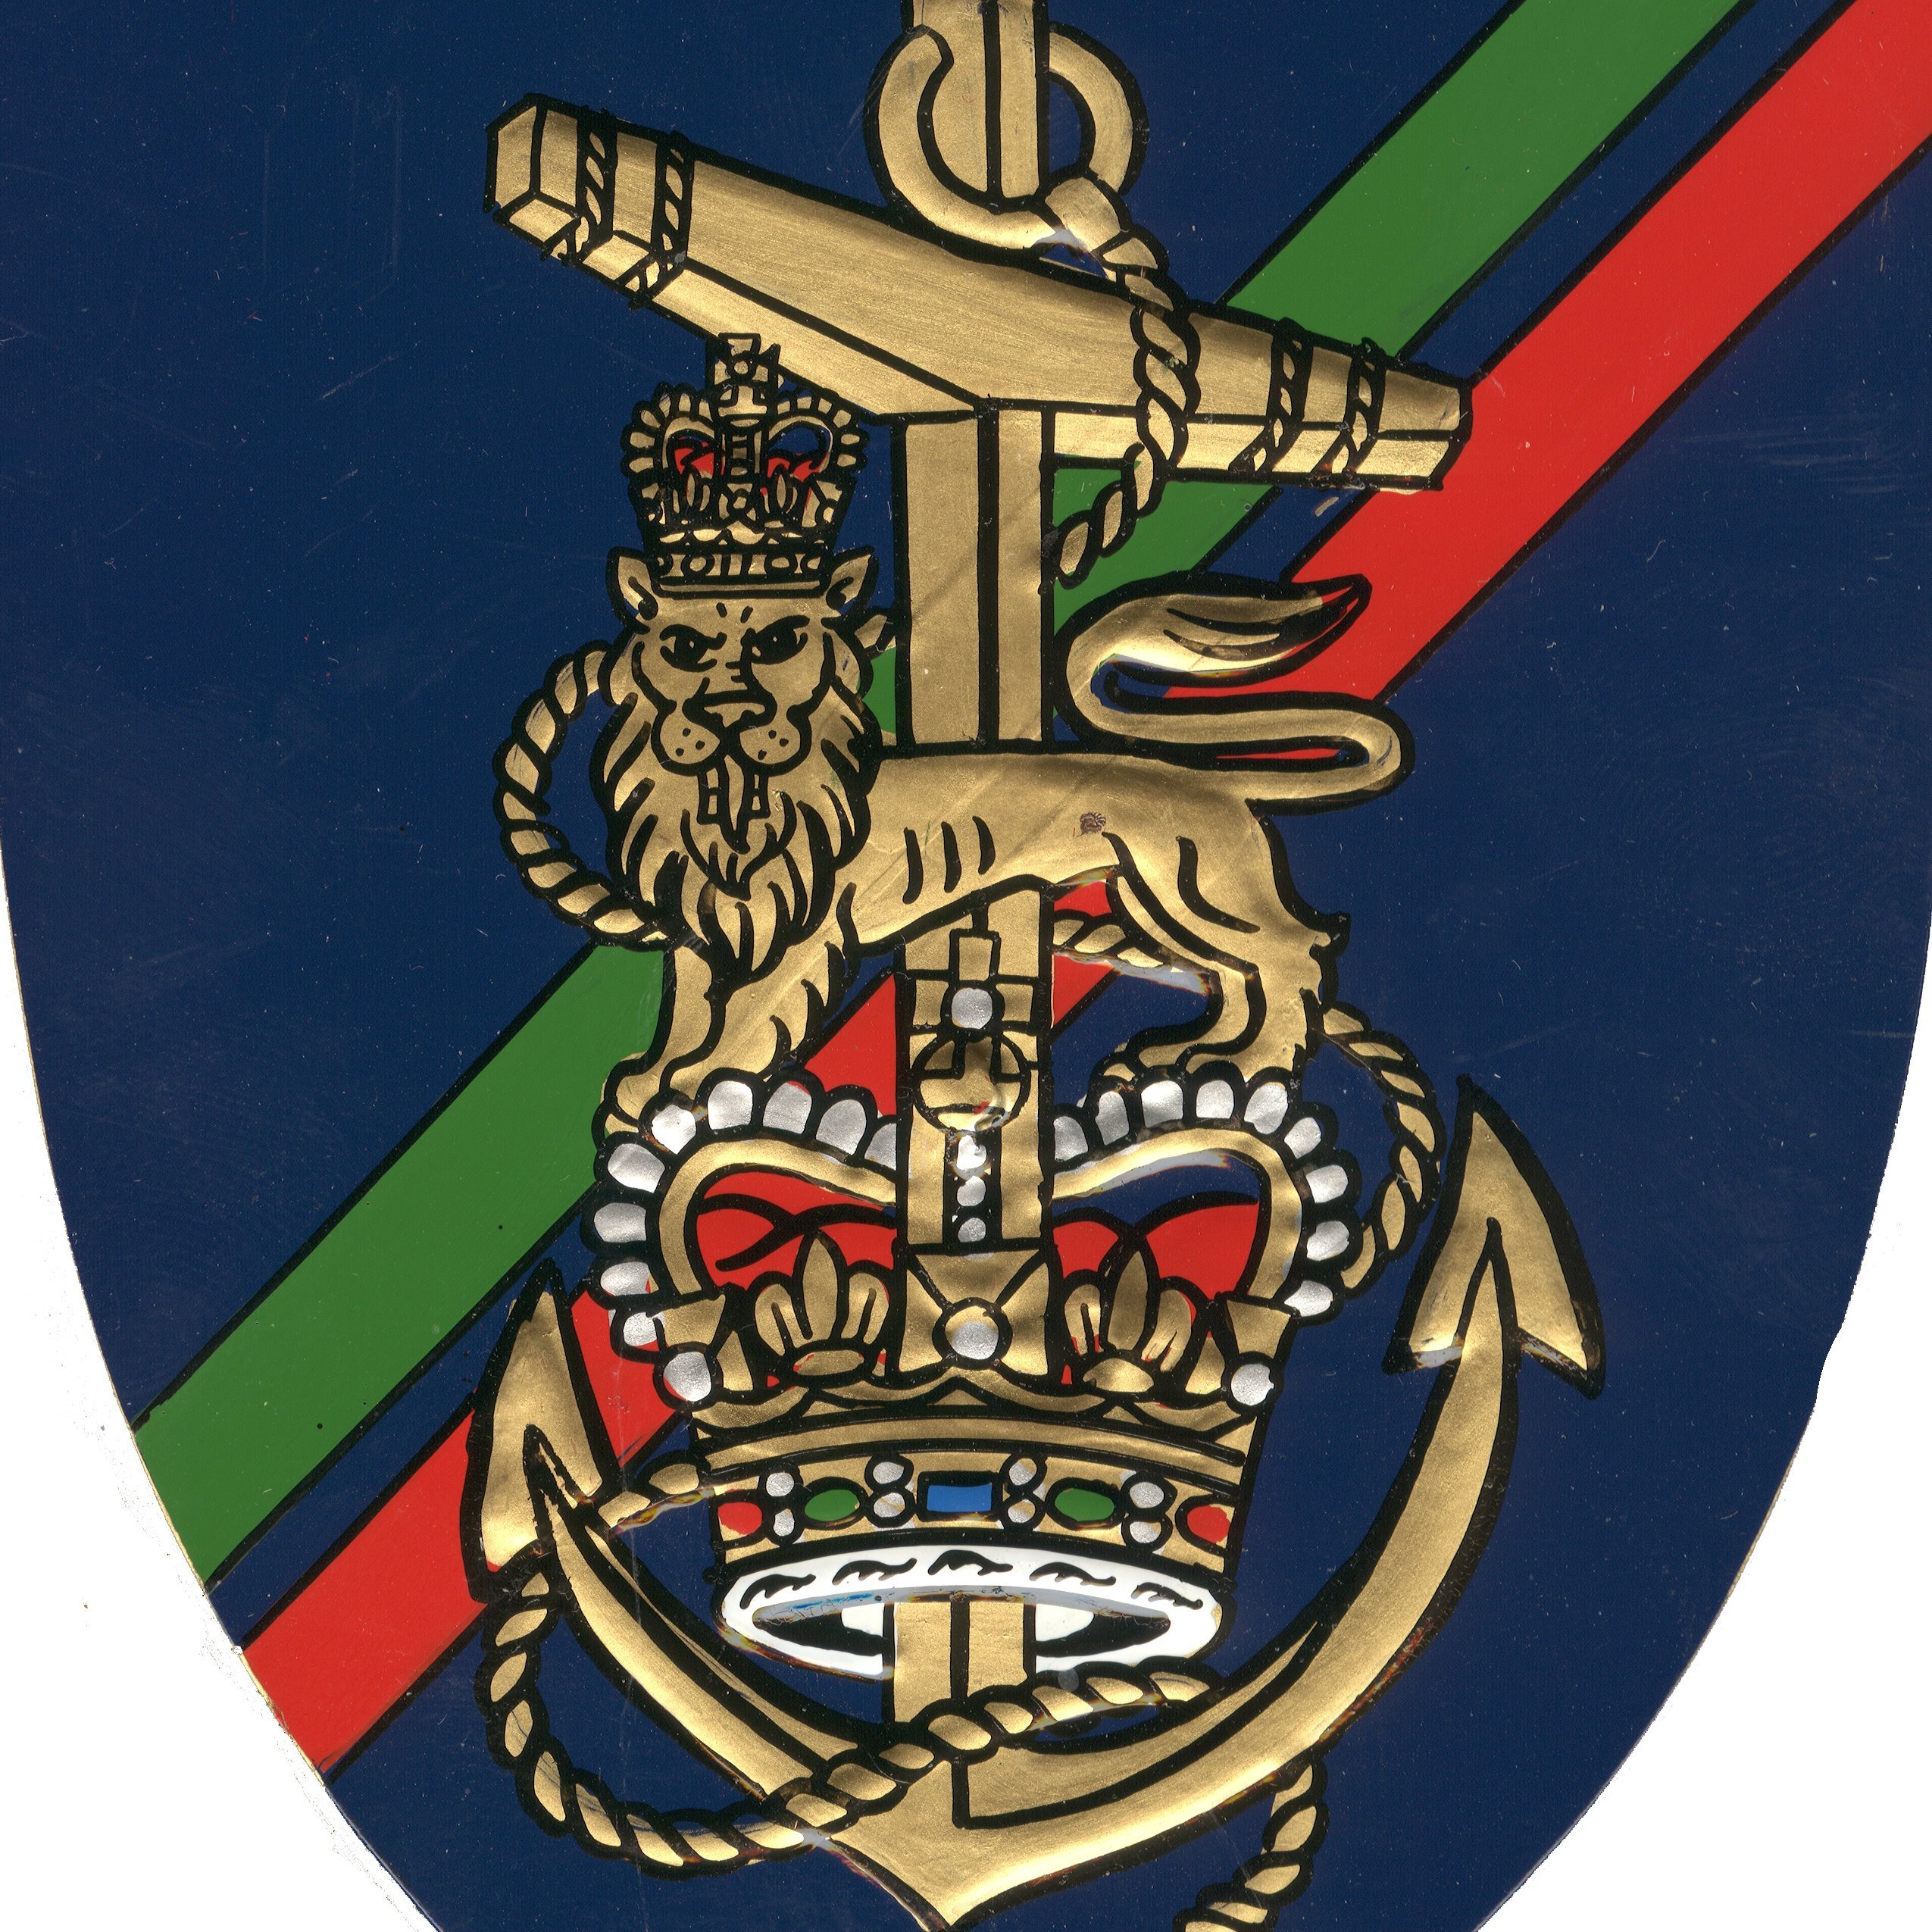 The Royal Marines Historical Society (RMHS) was formed in 1964 to encourage research and stimulate an interest in the history of the Royal Marines.